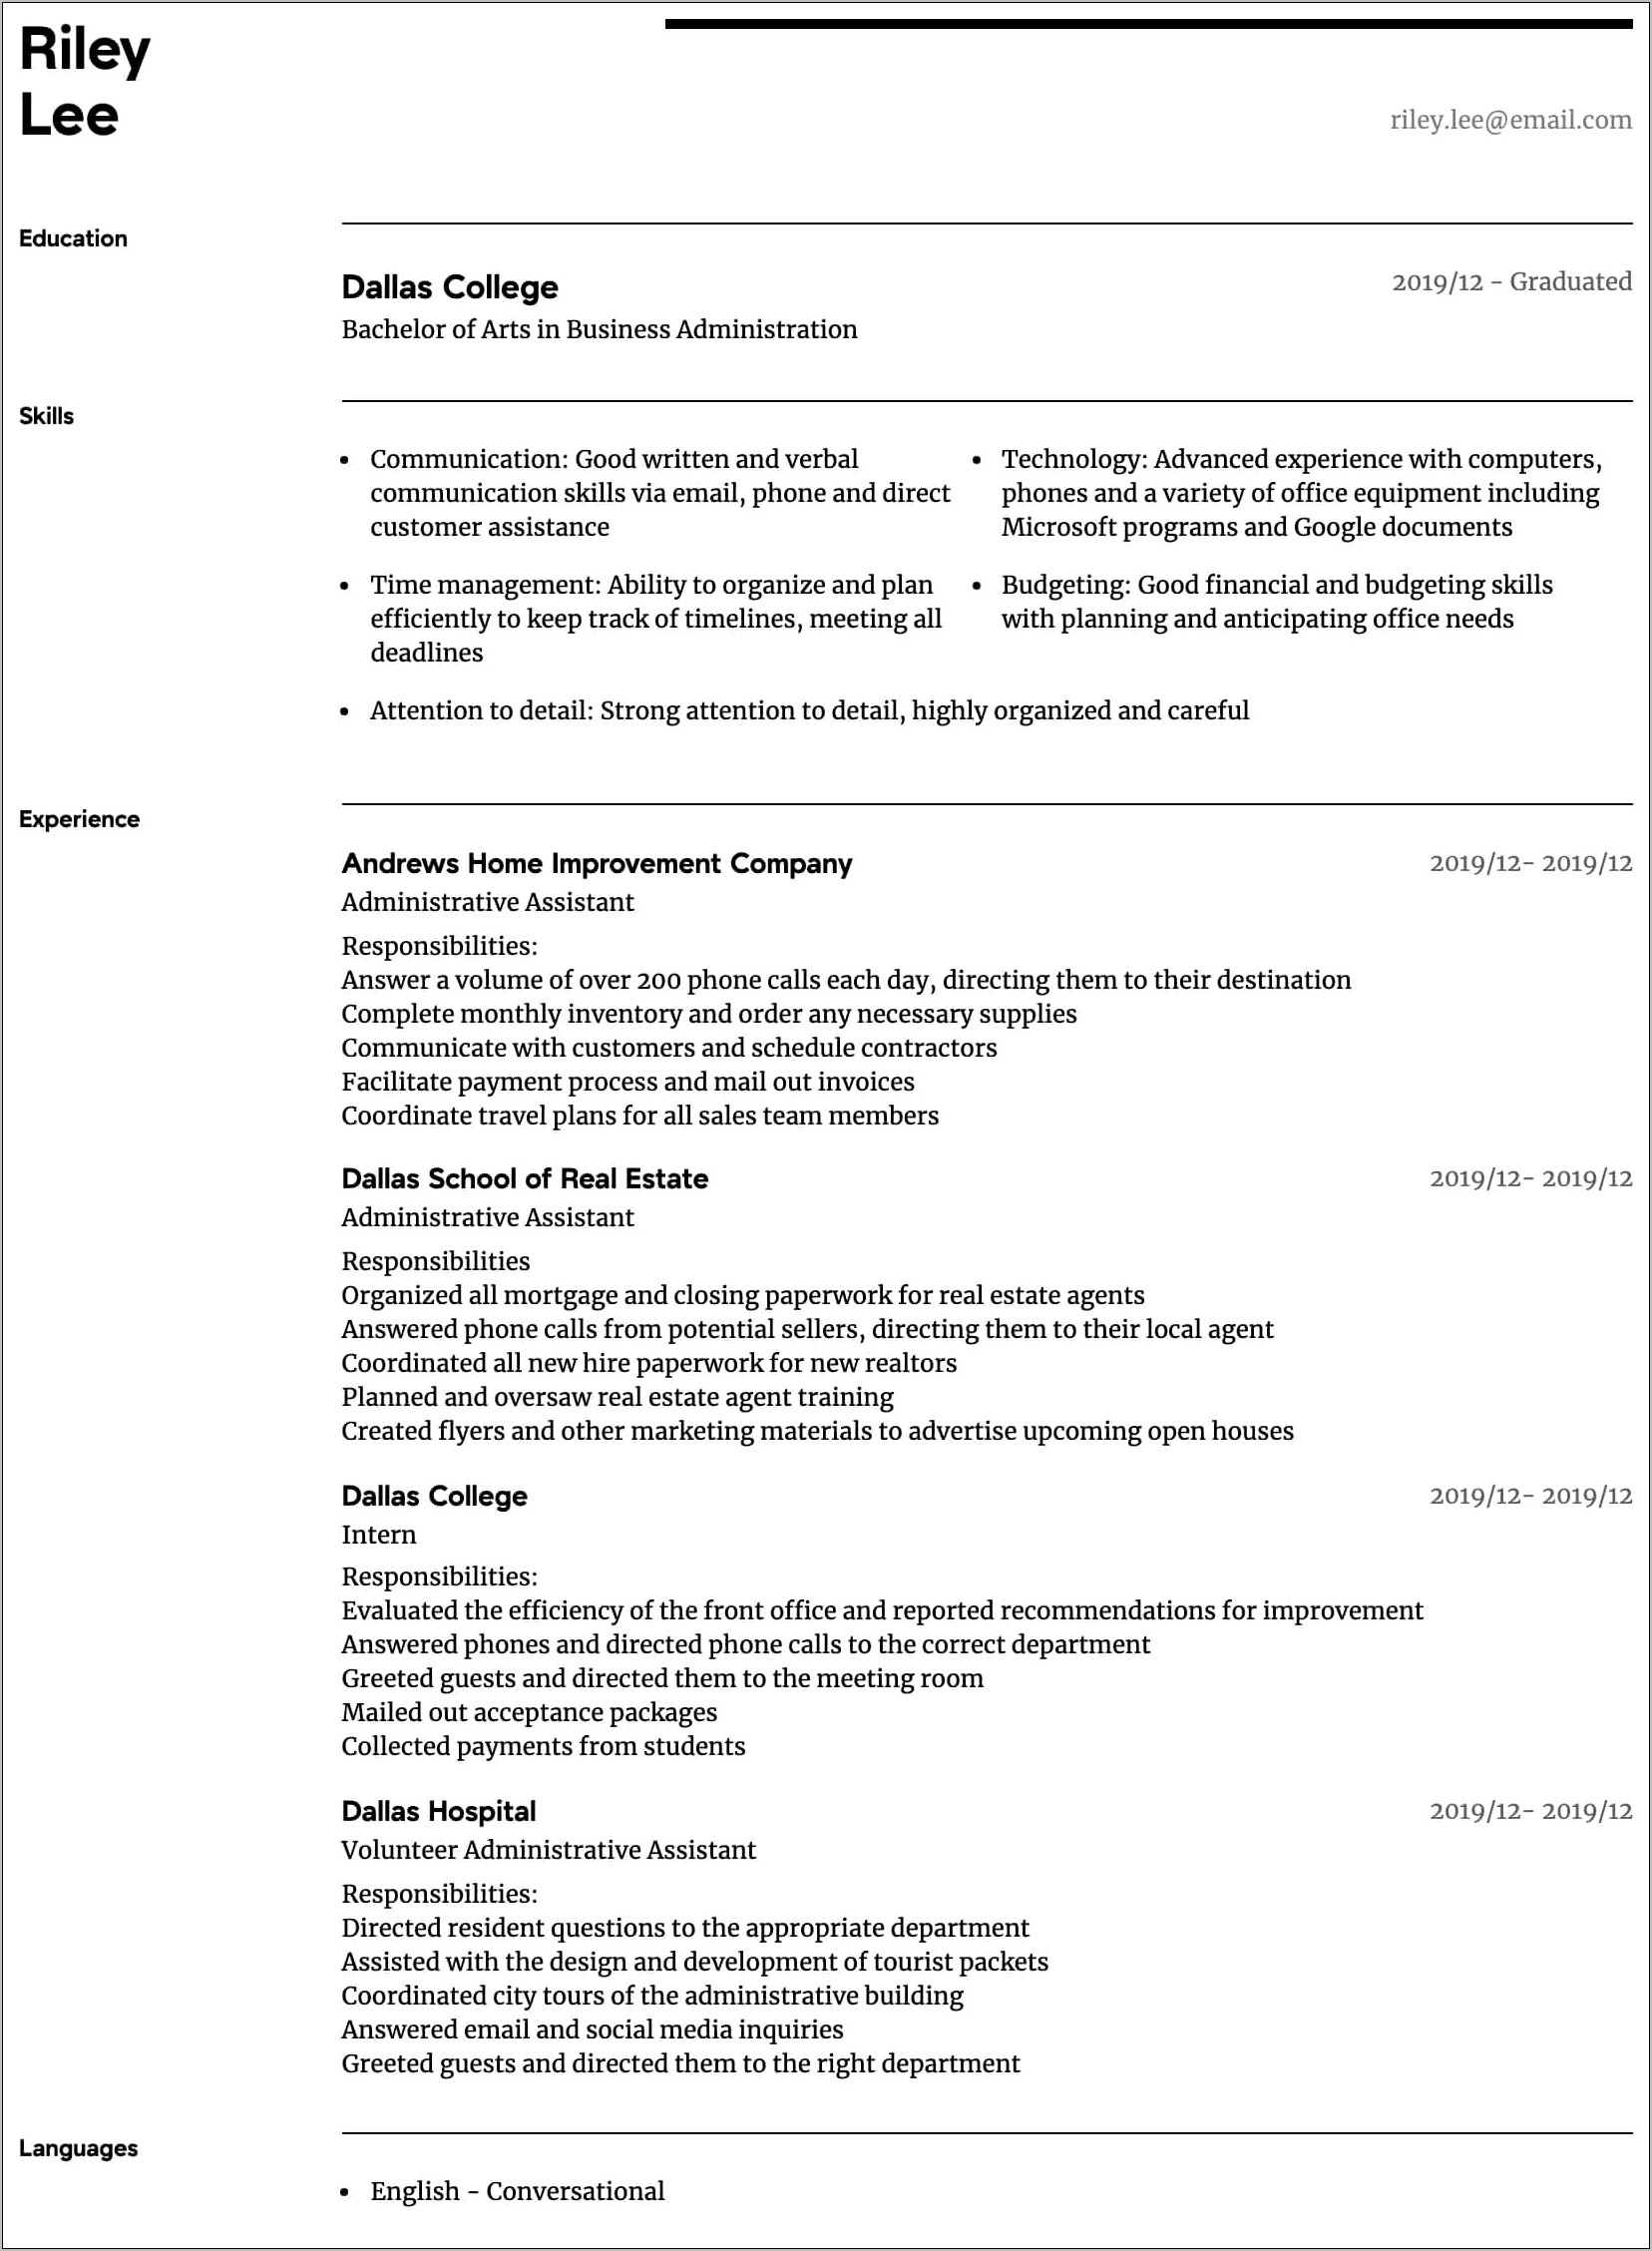 Example Of Executive Administrative Assistant Resume